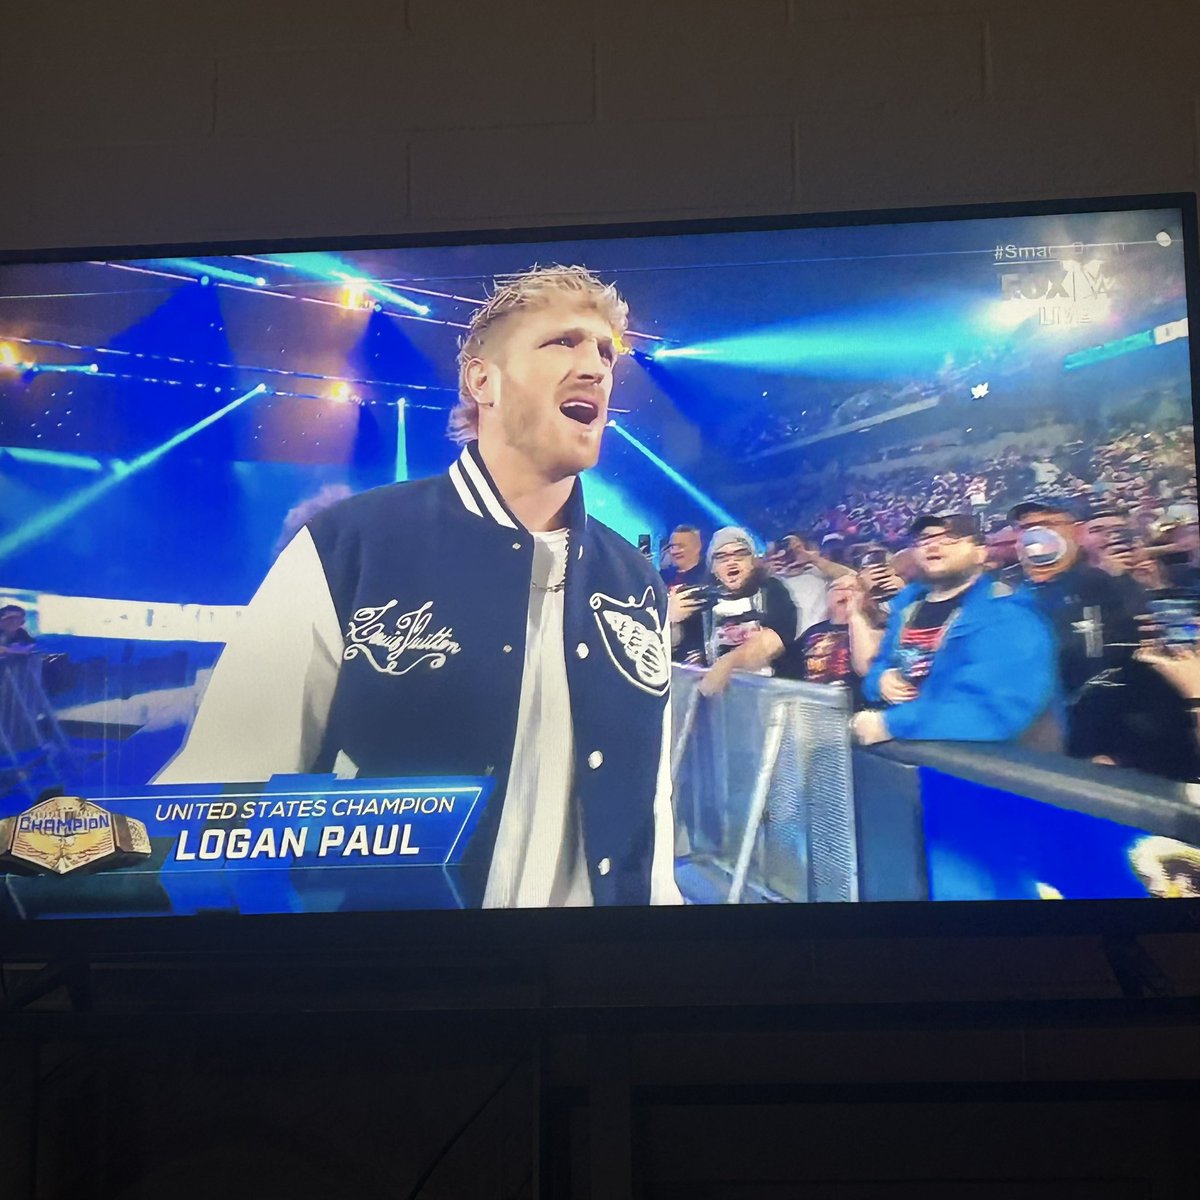 This shit best be title for title. #Smackdown #WWETitle #USTitle